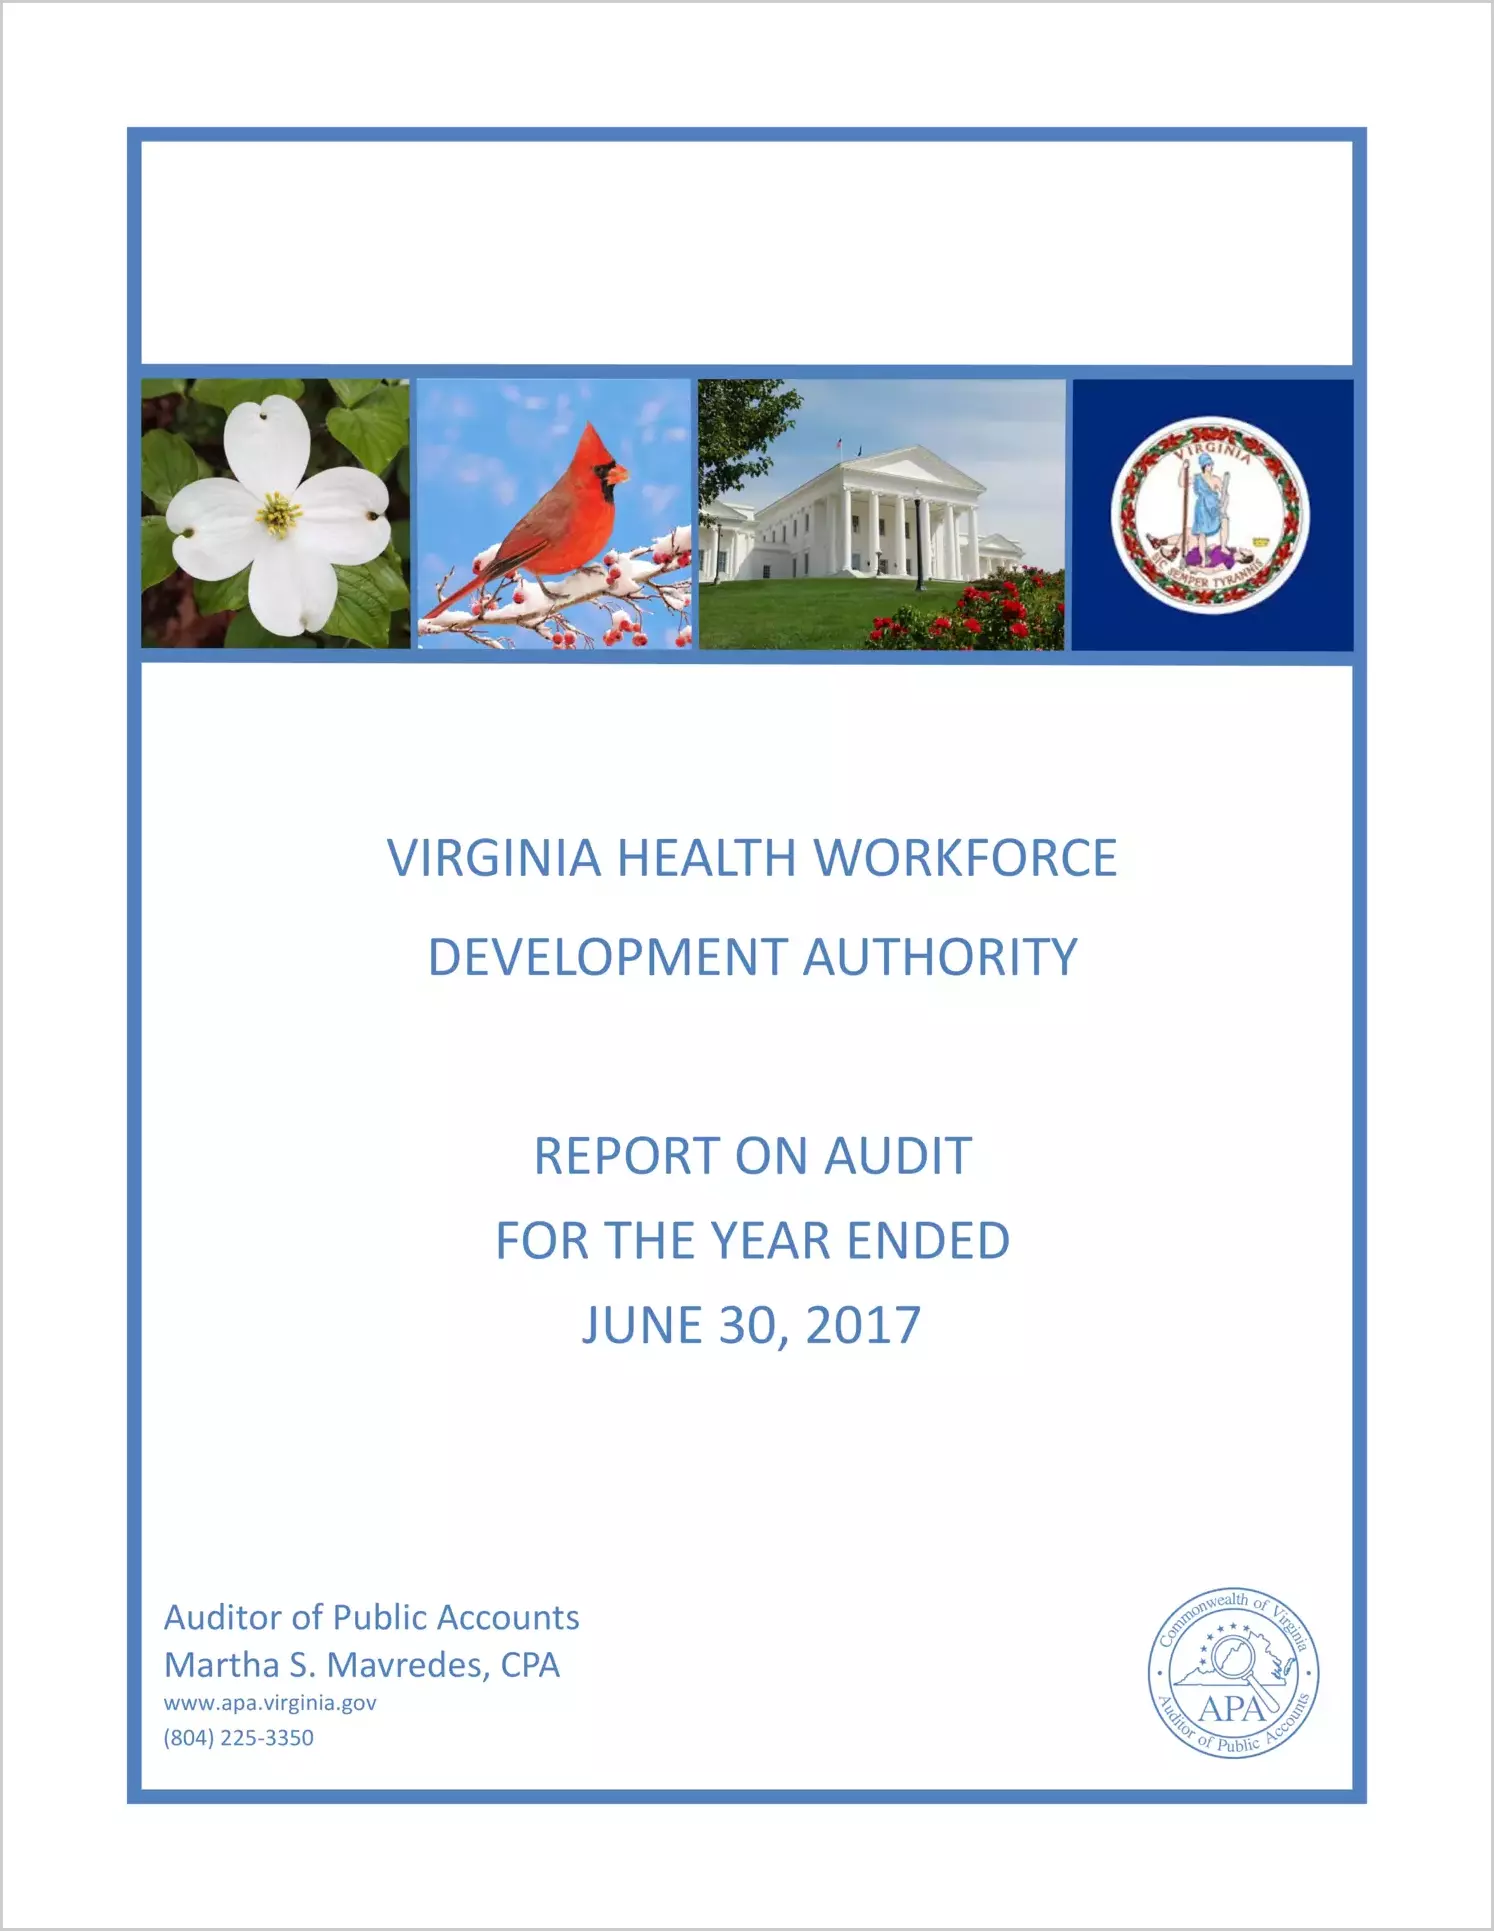 Virginia Health Workforce Development Authority for the year ended June 30, 2017